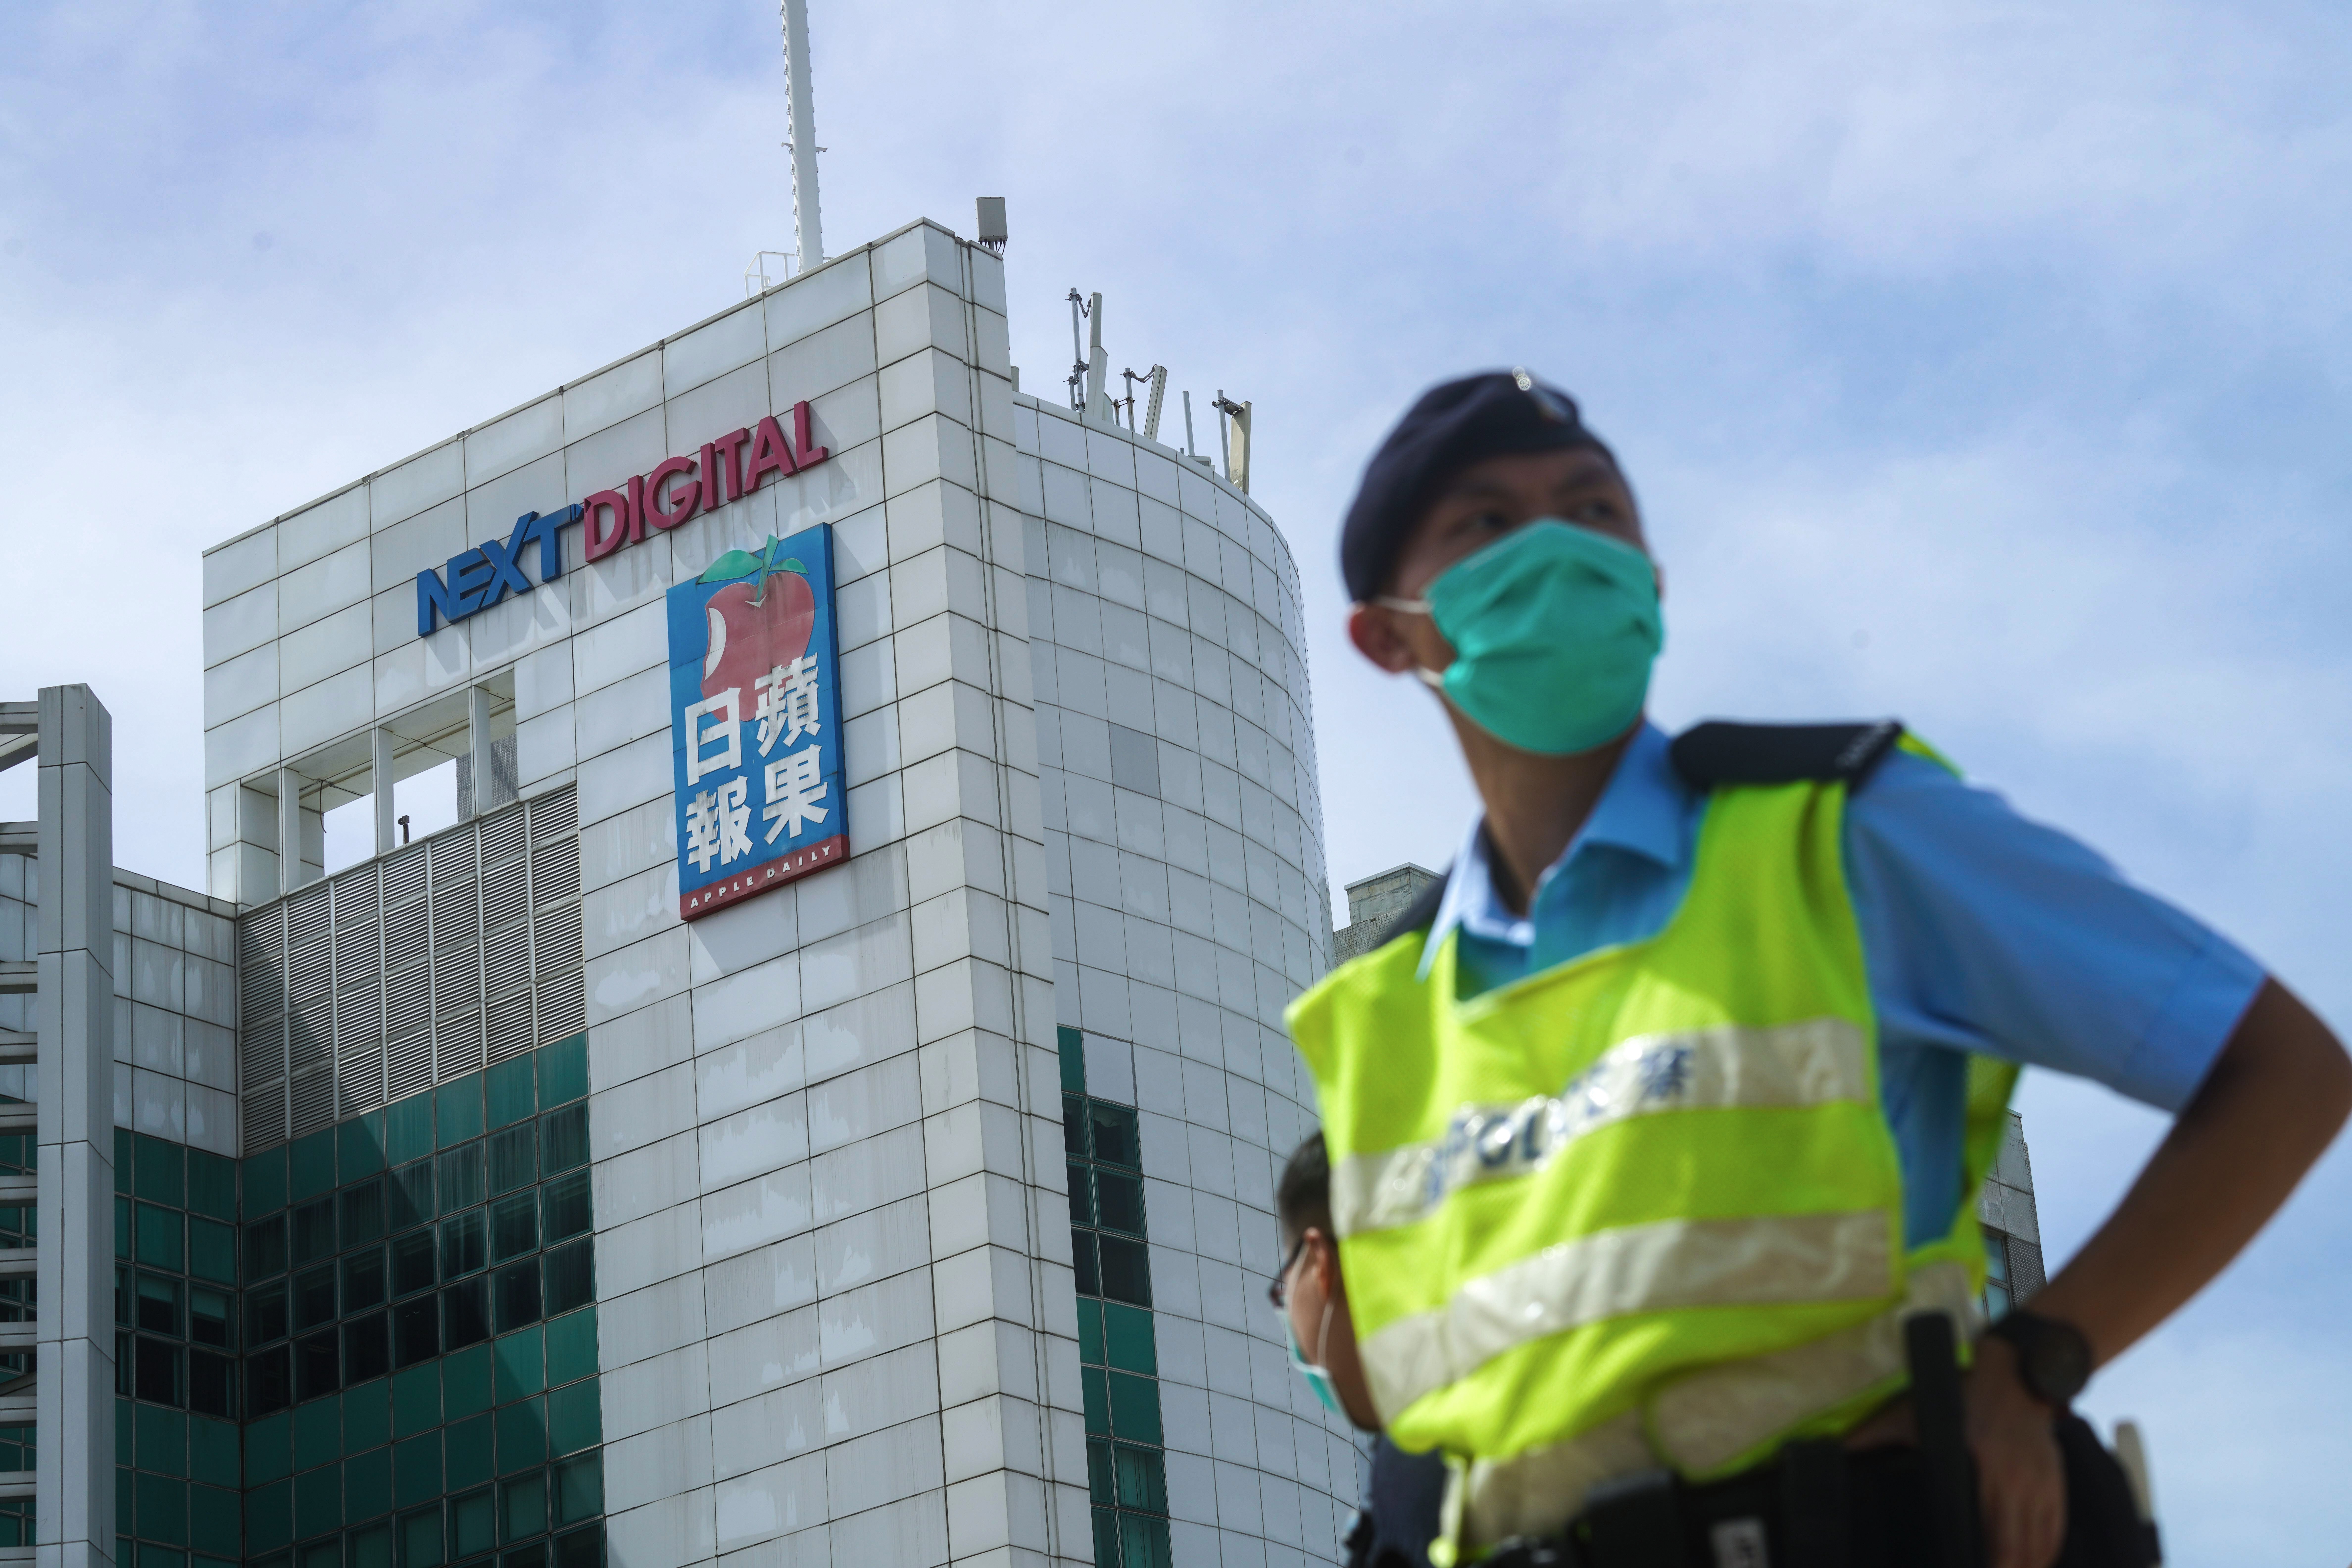 Police officers watch over a search operation outside Next Digital’s head office in Tseung Kwan O, Hong Kong. Photo: Winson Wong